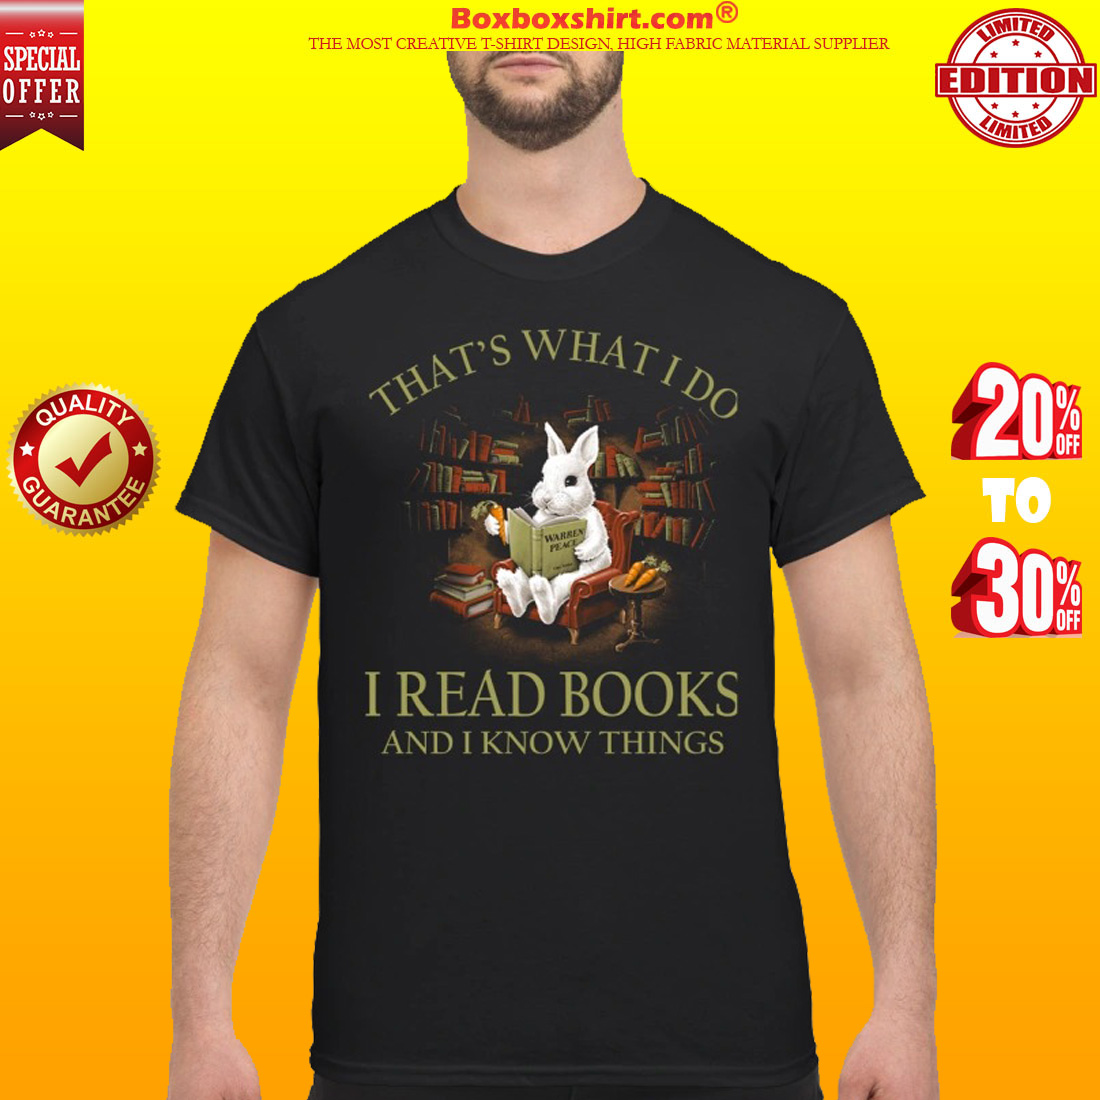 Rabbit that's what I do I read books and I know things classic shirt